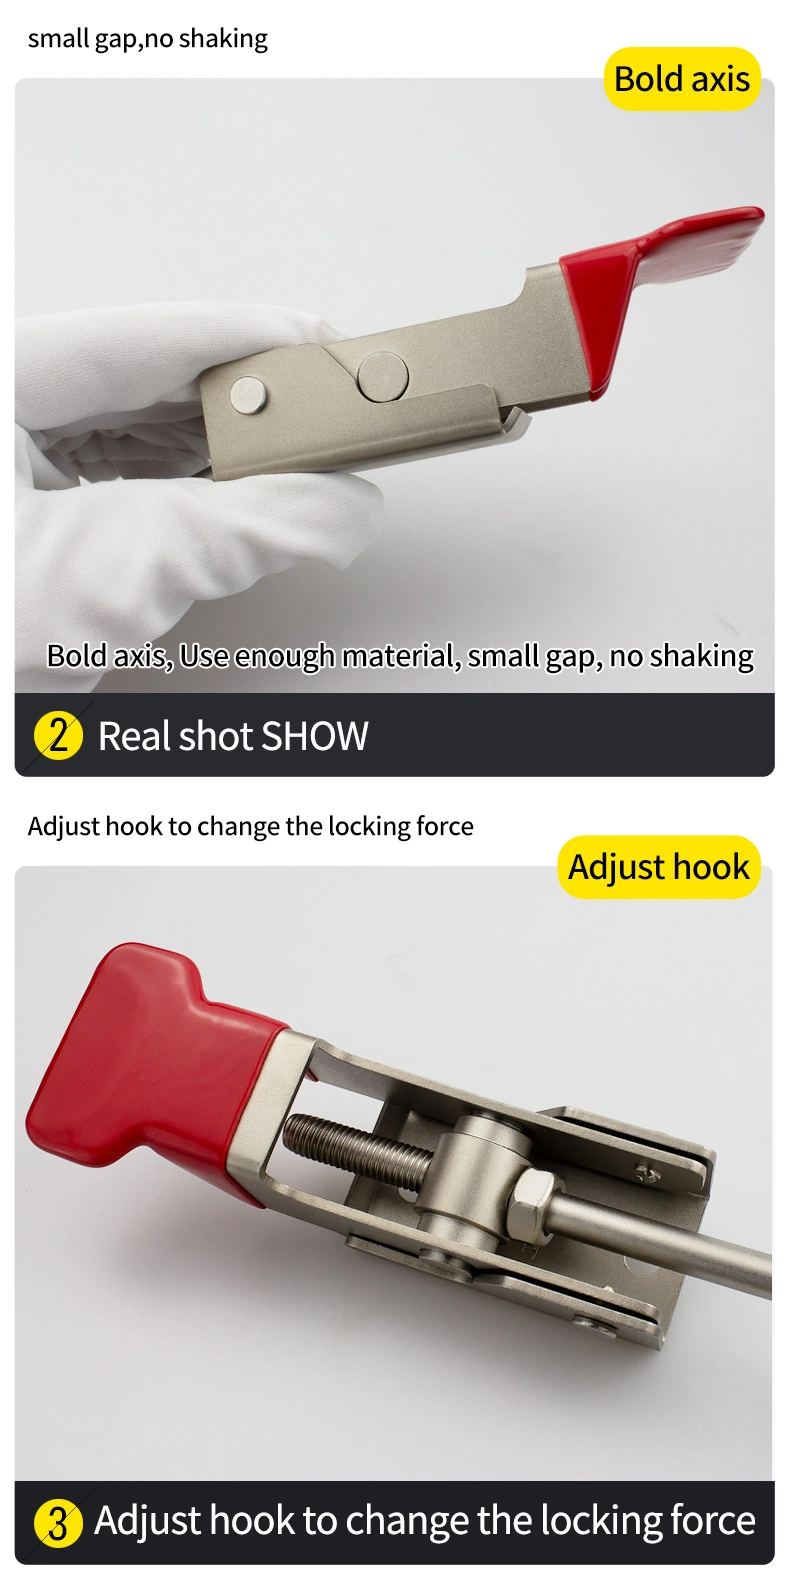 Adjustable Heavy Duty Toggle Clamp with Long Hook Toggle Latch for Vehicles/Medical Equipment